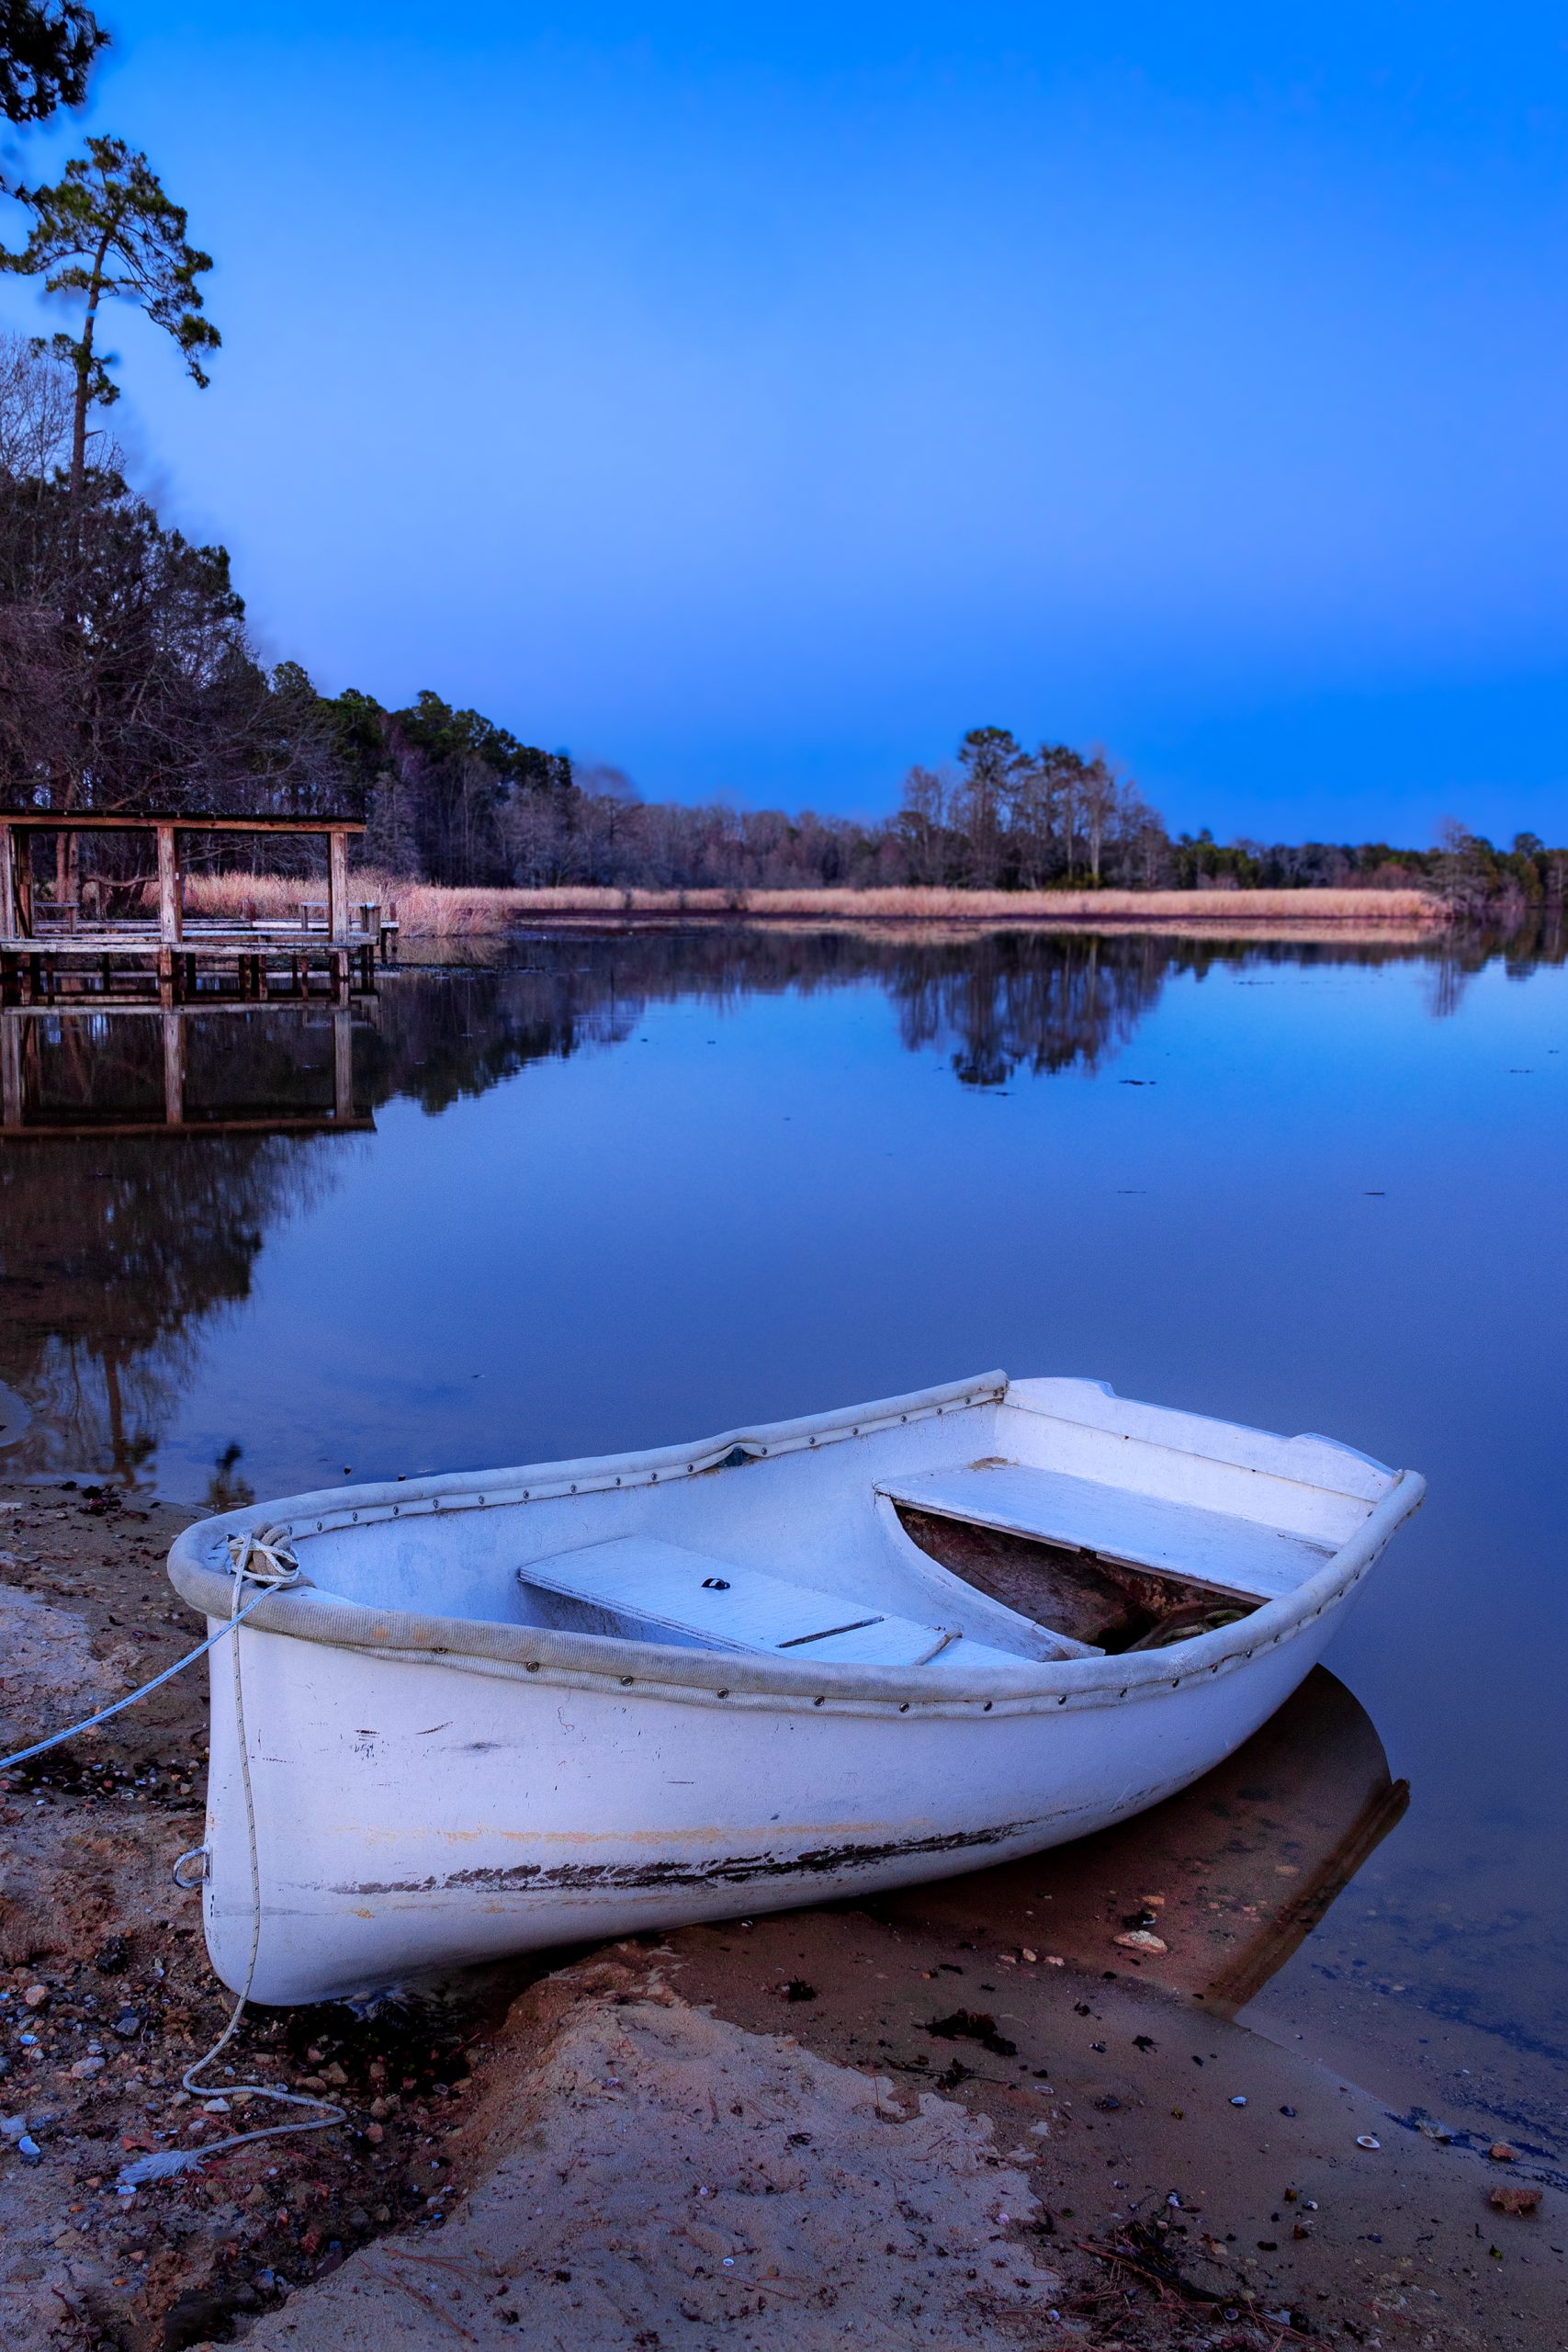 A camp dinghy rests at twilight, reminiscent of an artist’s still life.